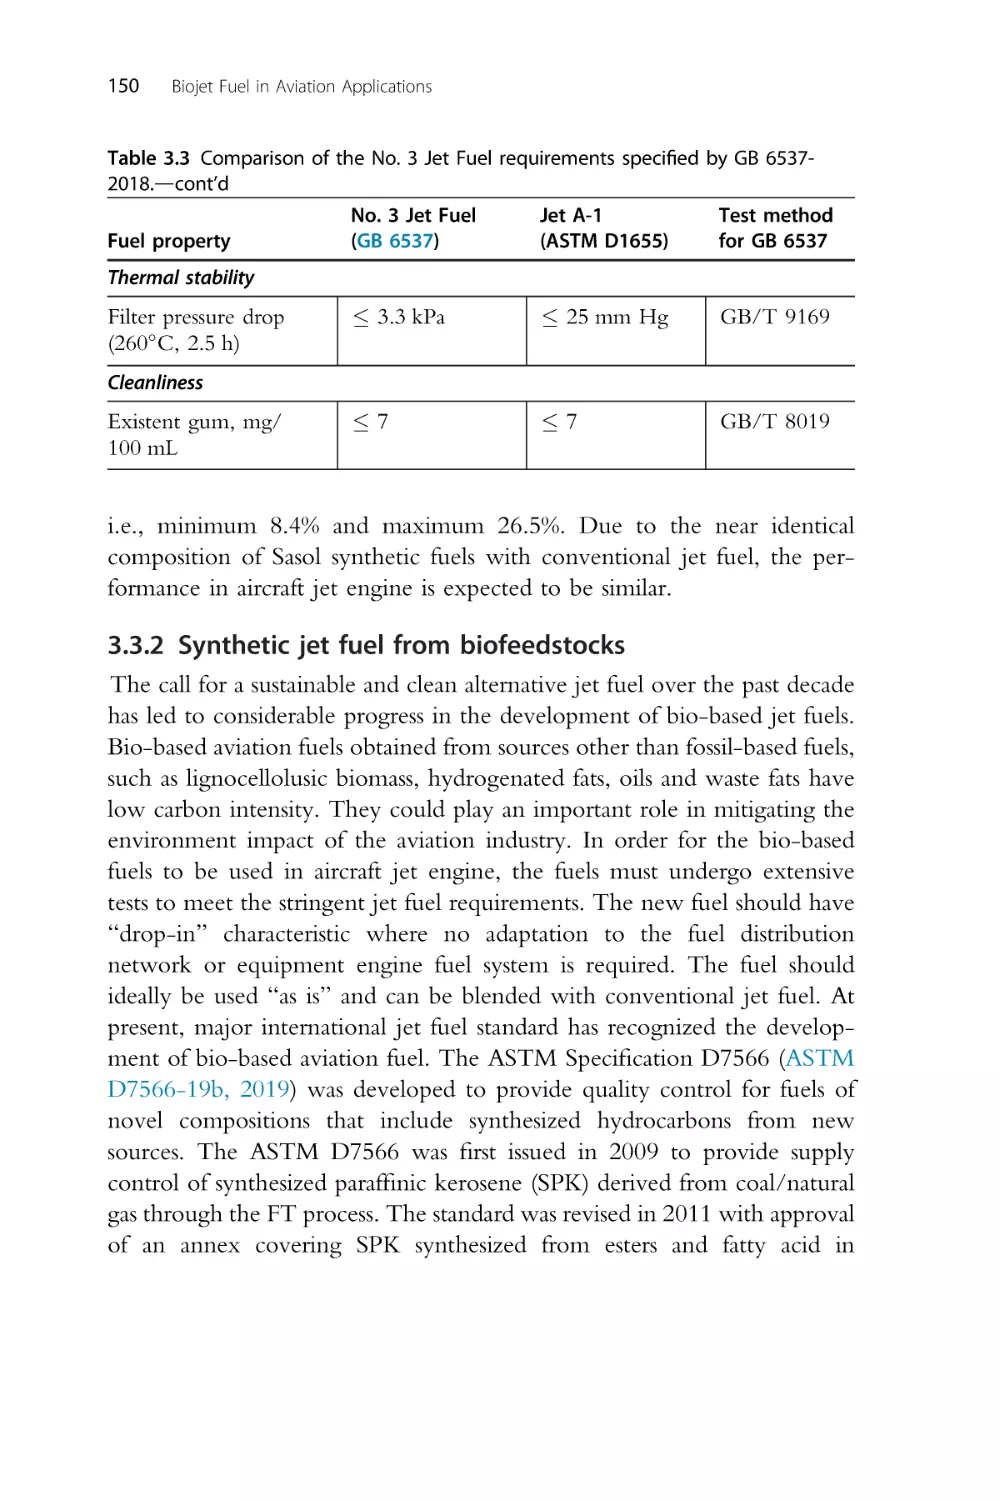 3.3.2 Synthetic jet fuel from biofeedstocks